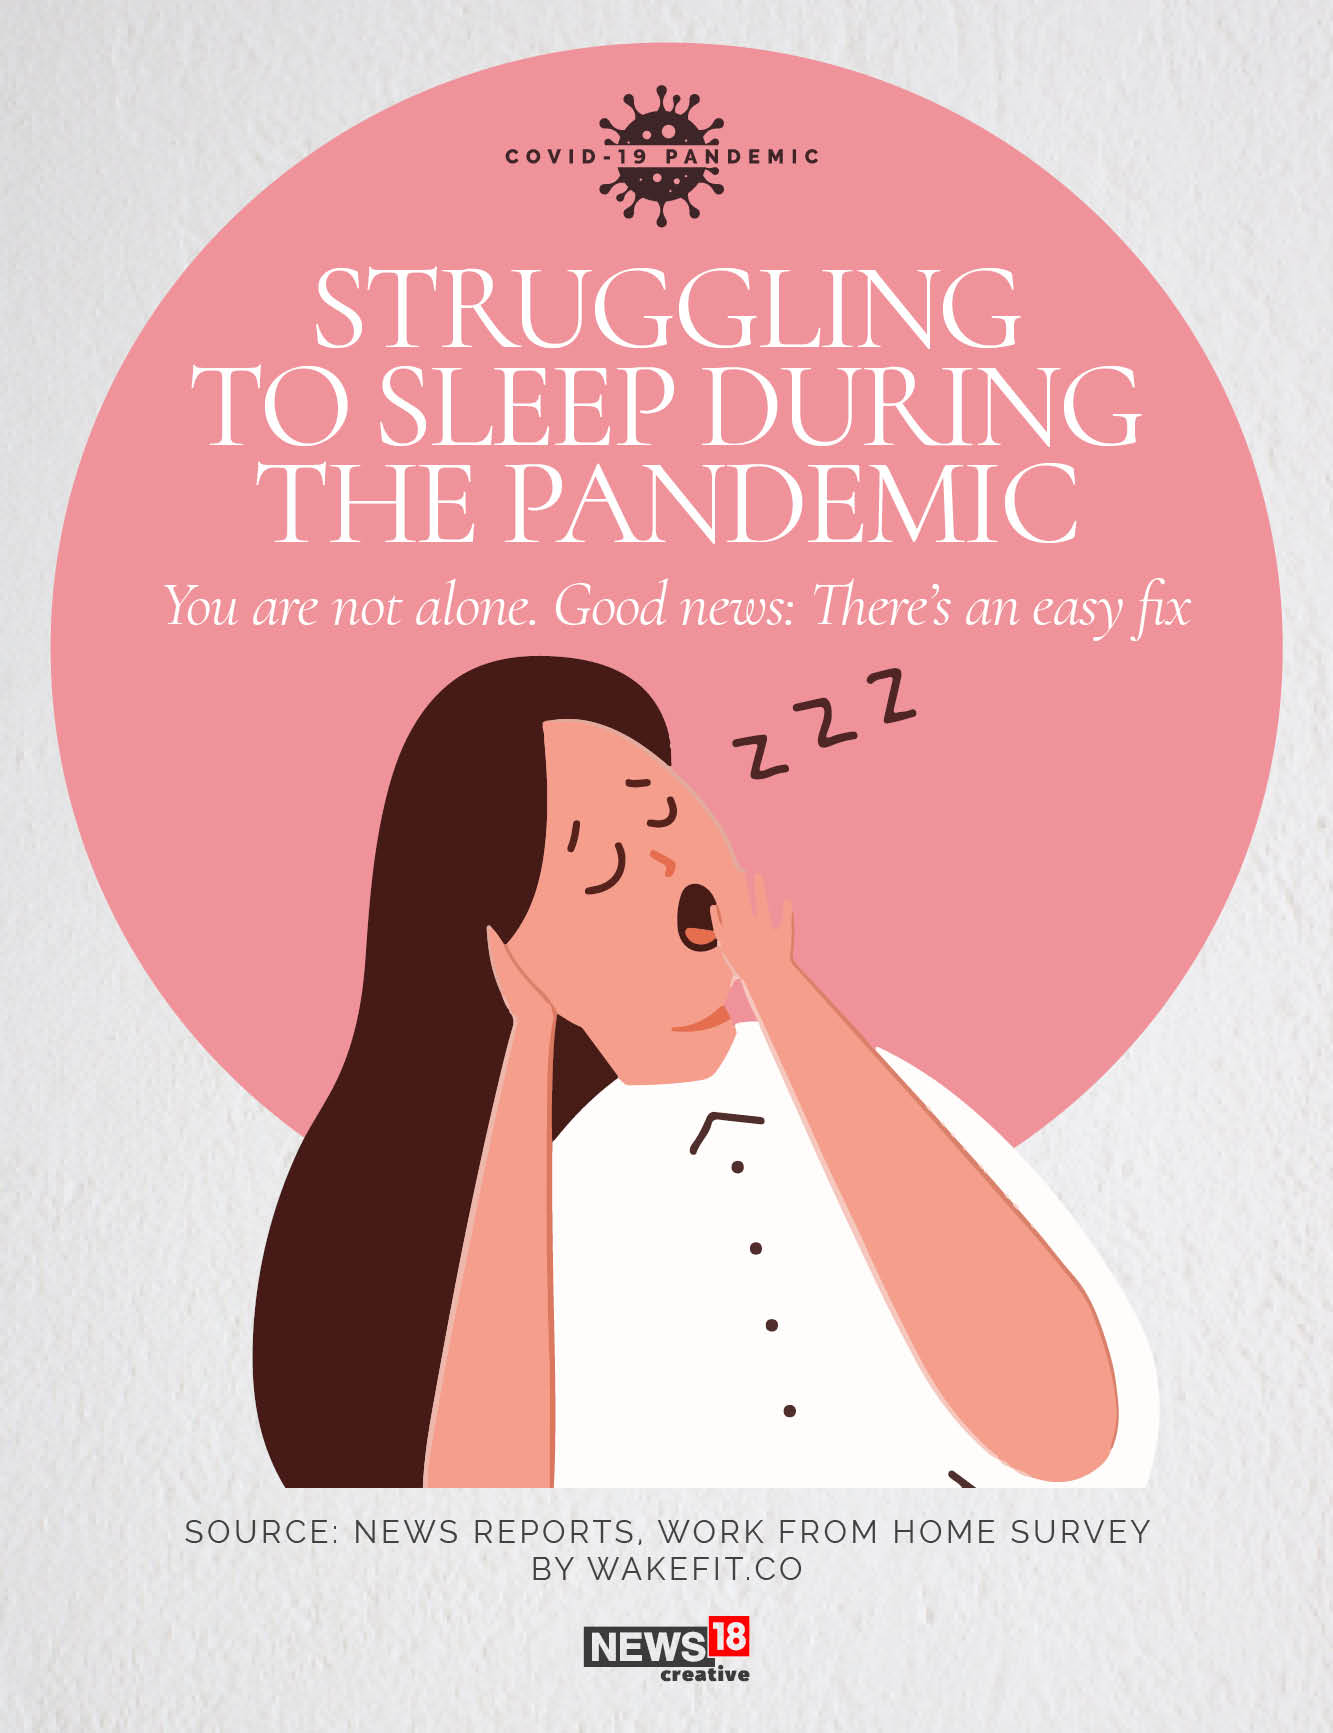 How to fix pandemic insomnia